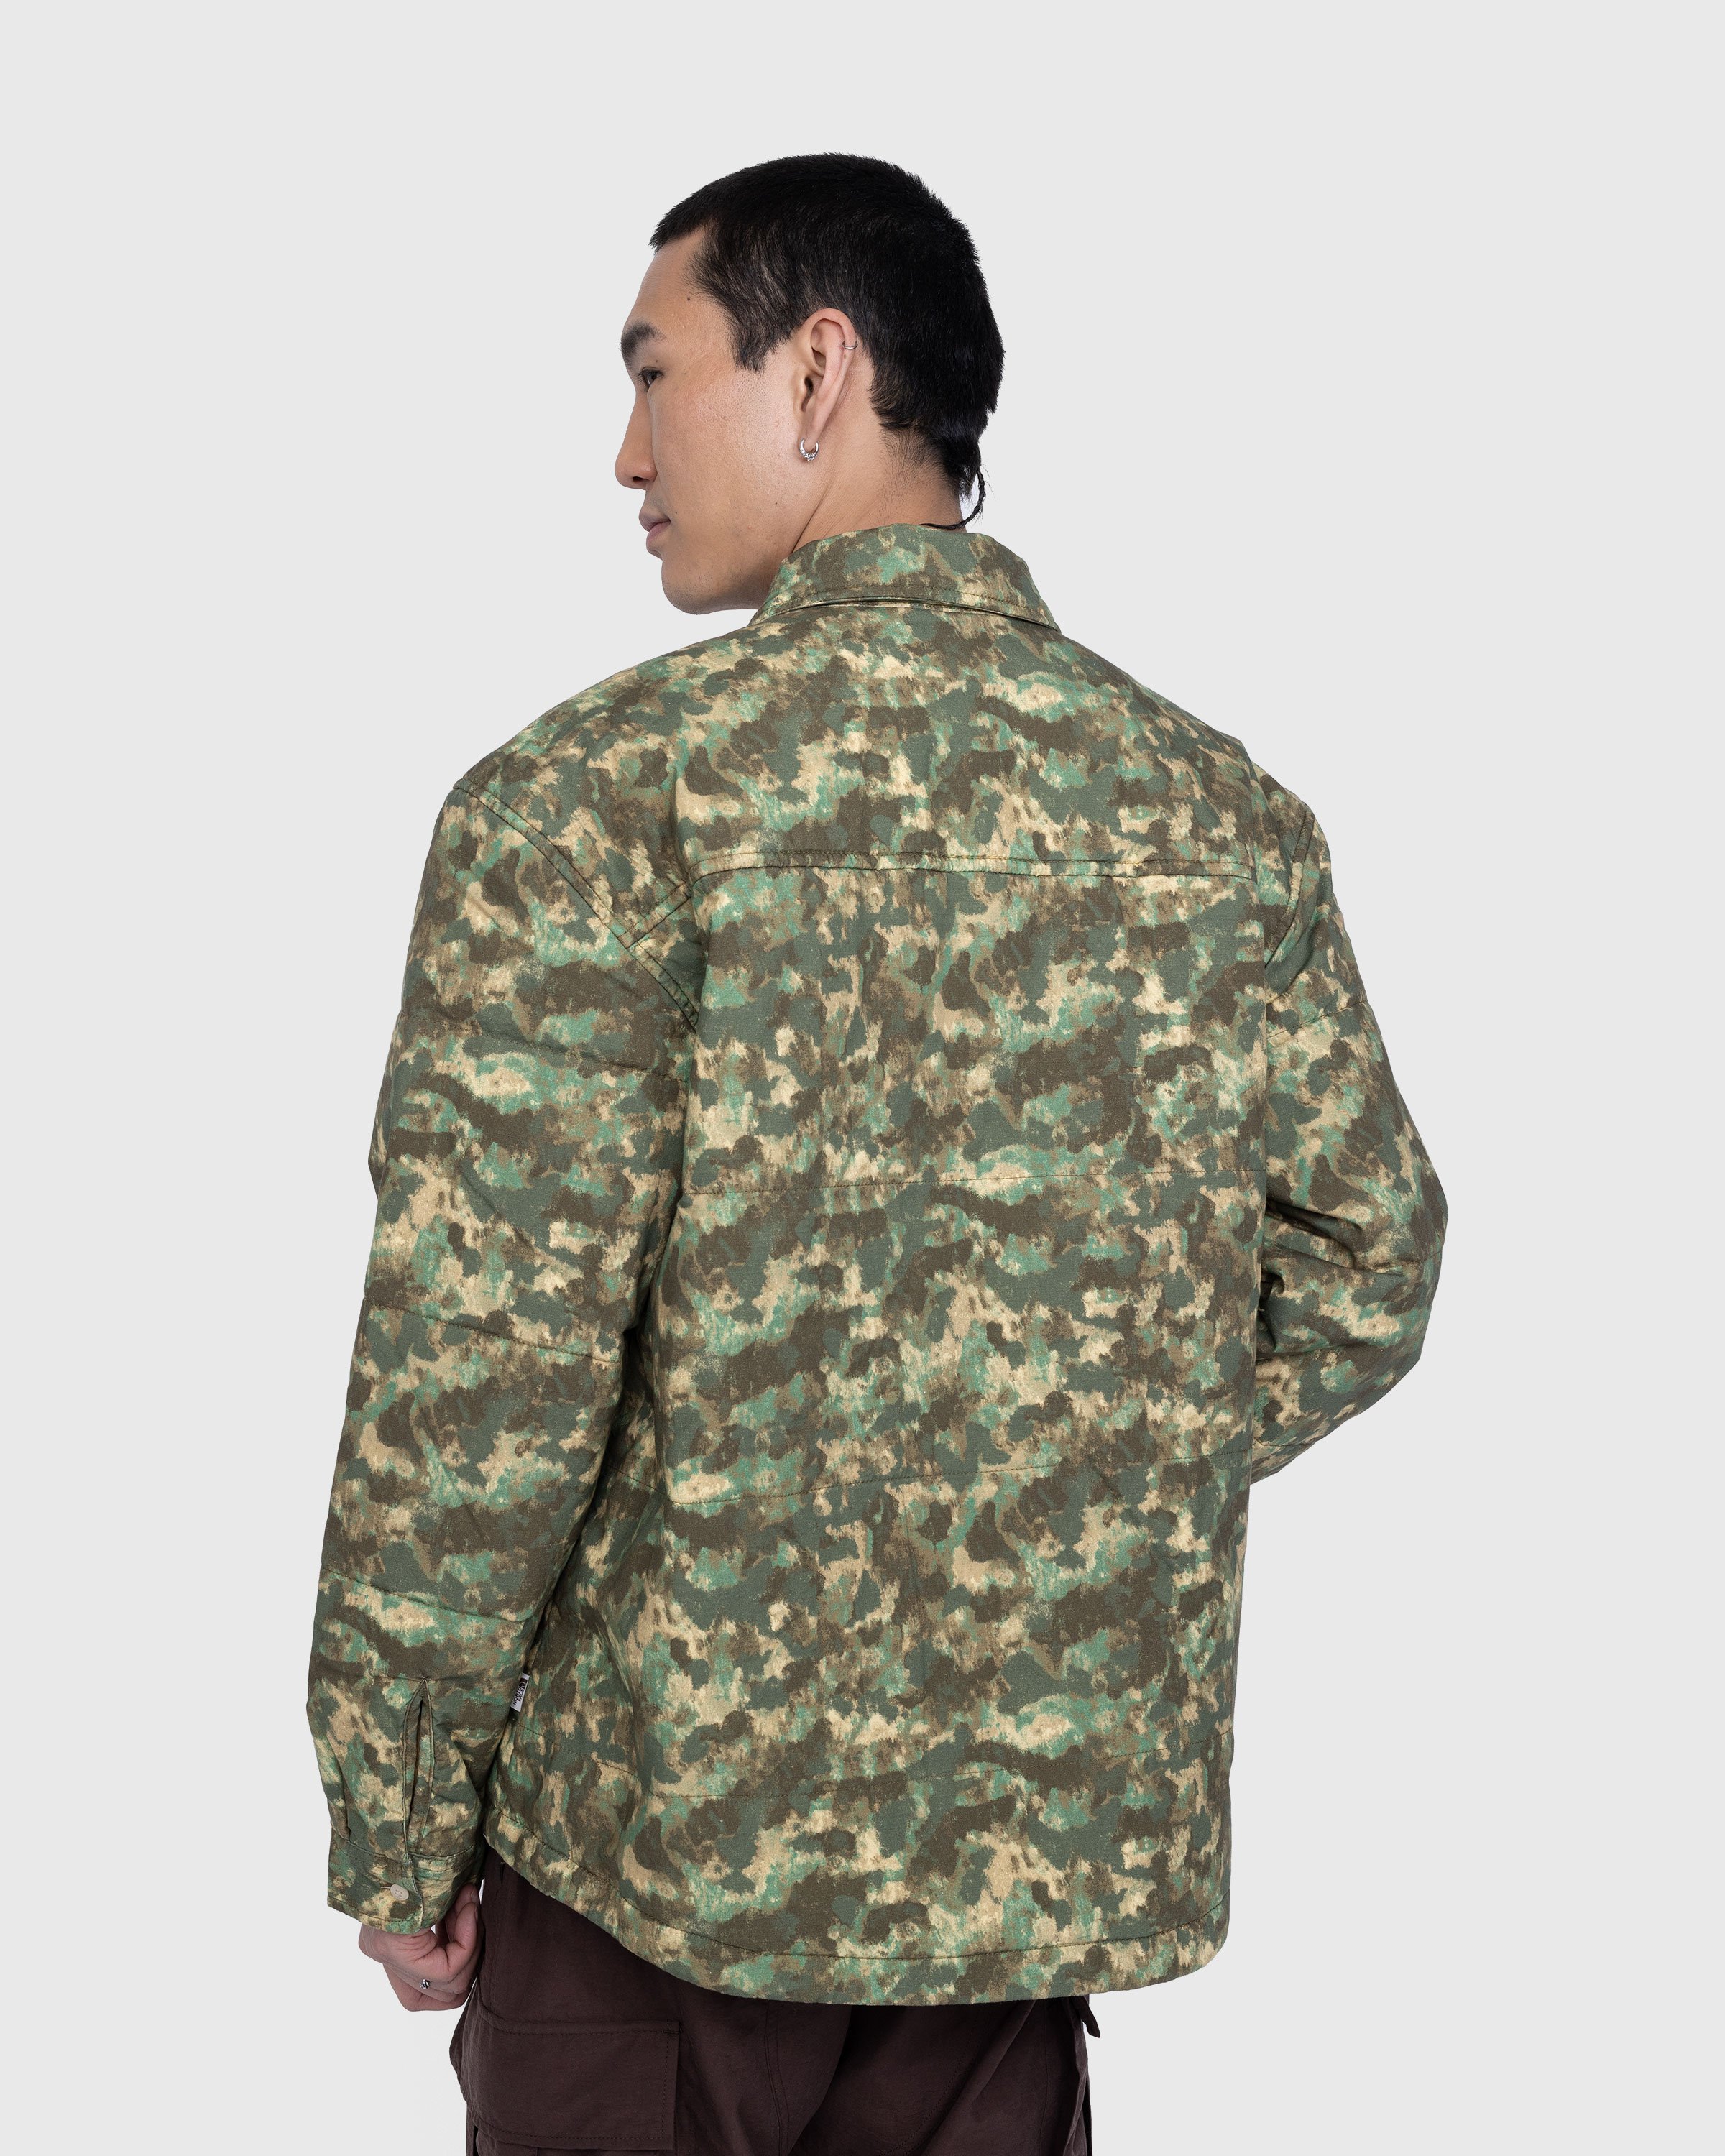 The North Face - M66 Stuffed Shirt Jacket Military Olive/Stippled Camo Print - Clothing - Green - Image 3